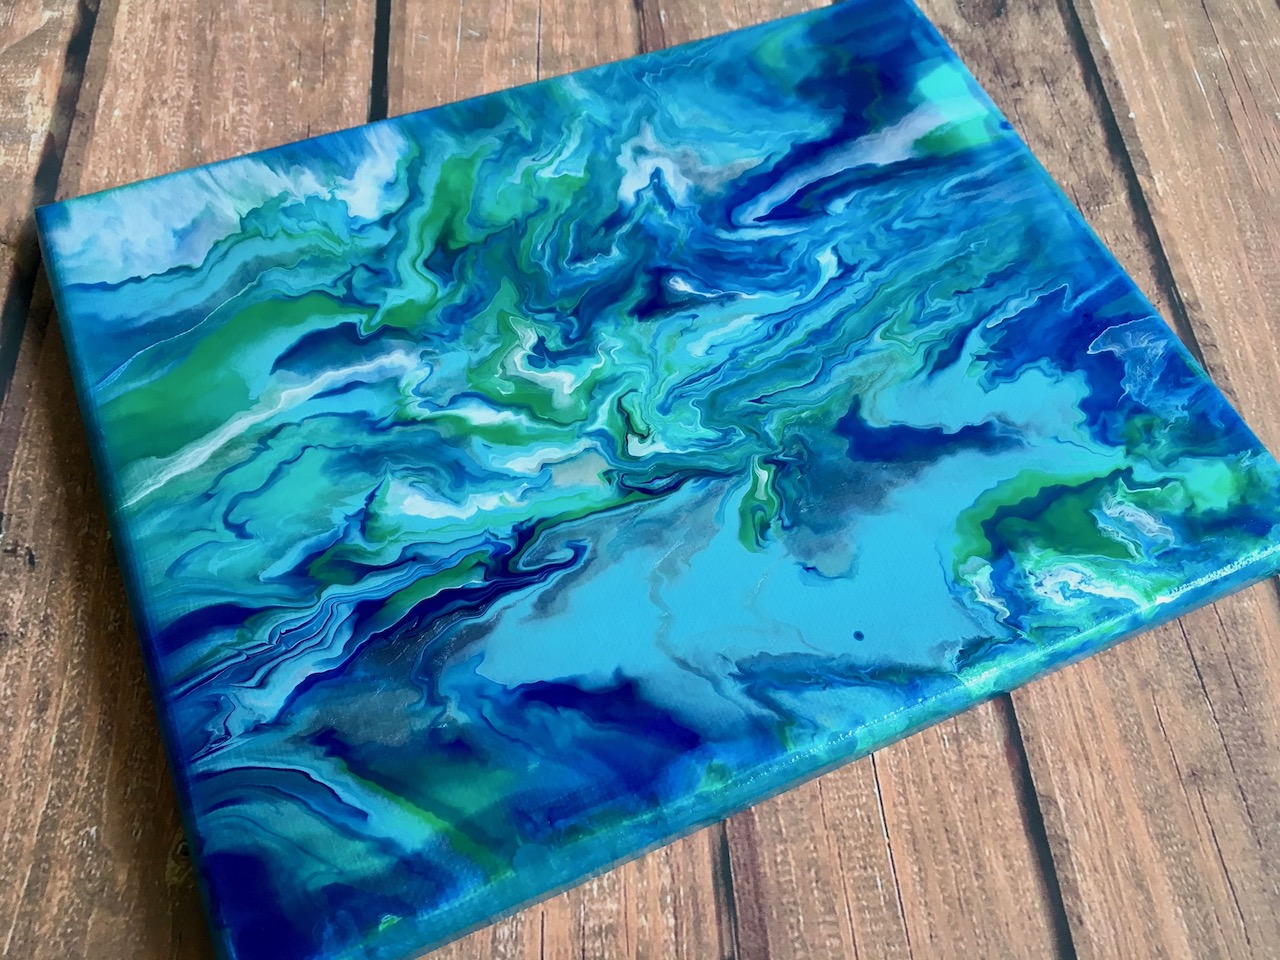 Paint pour image with blue green and white paint. 